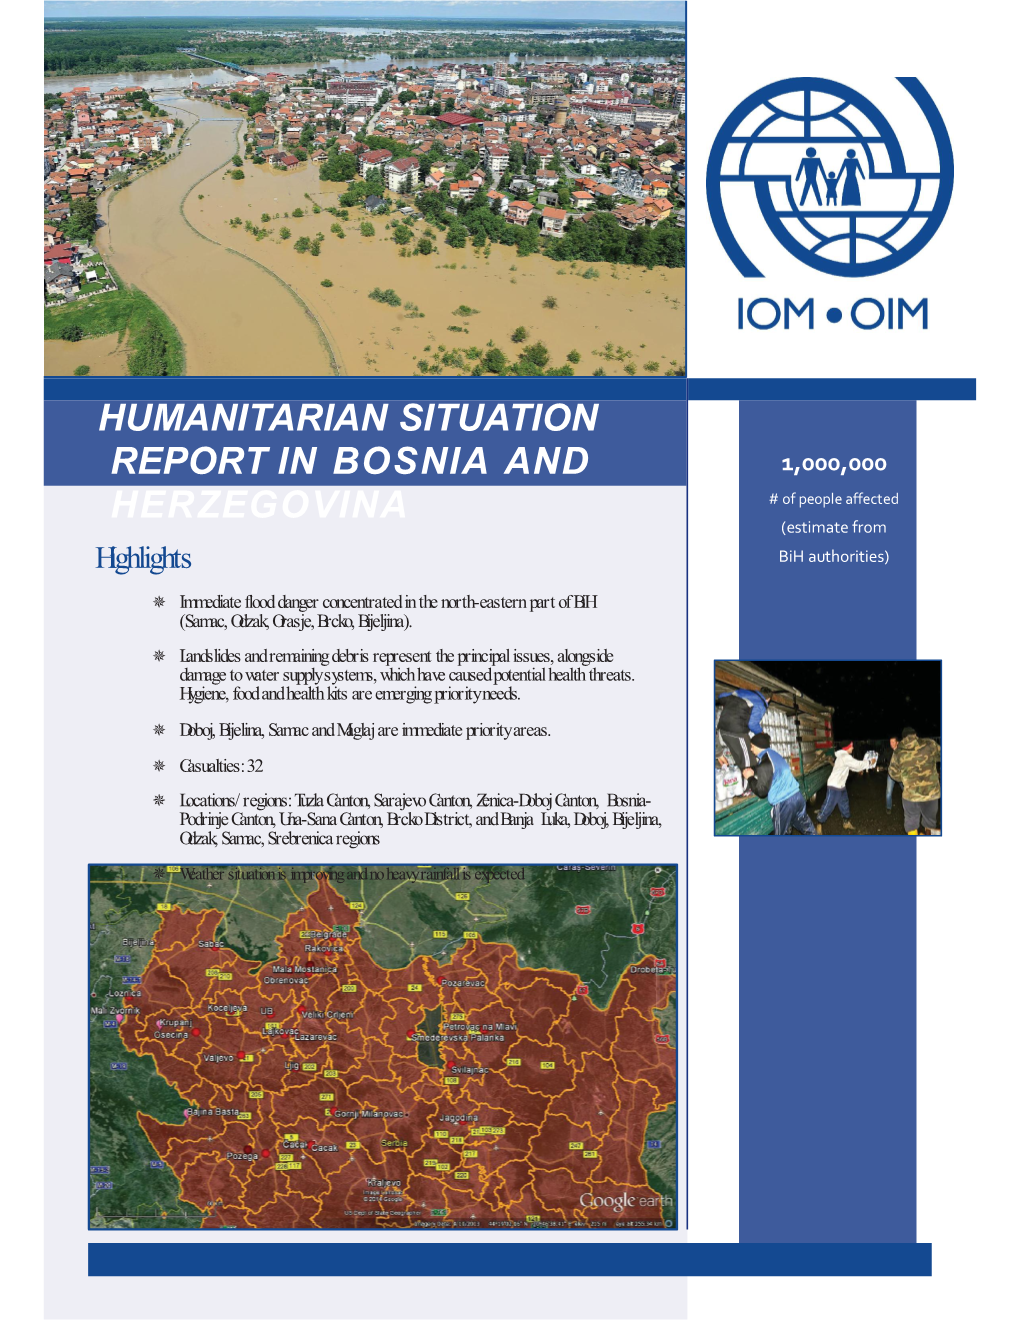 Bosnia and Herzegovina – Emergency Situation Caused By